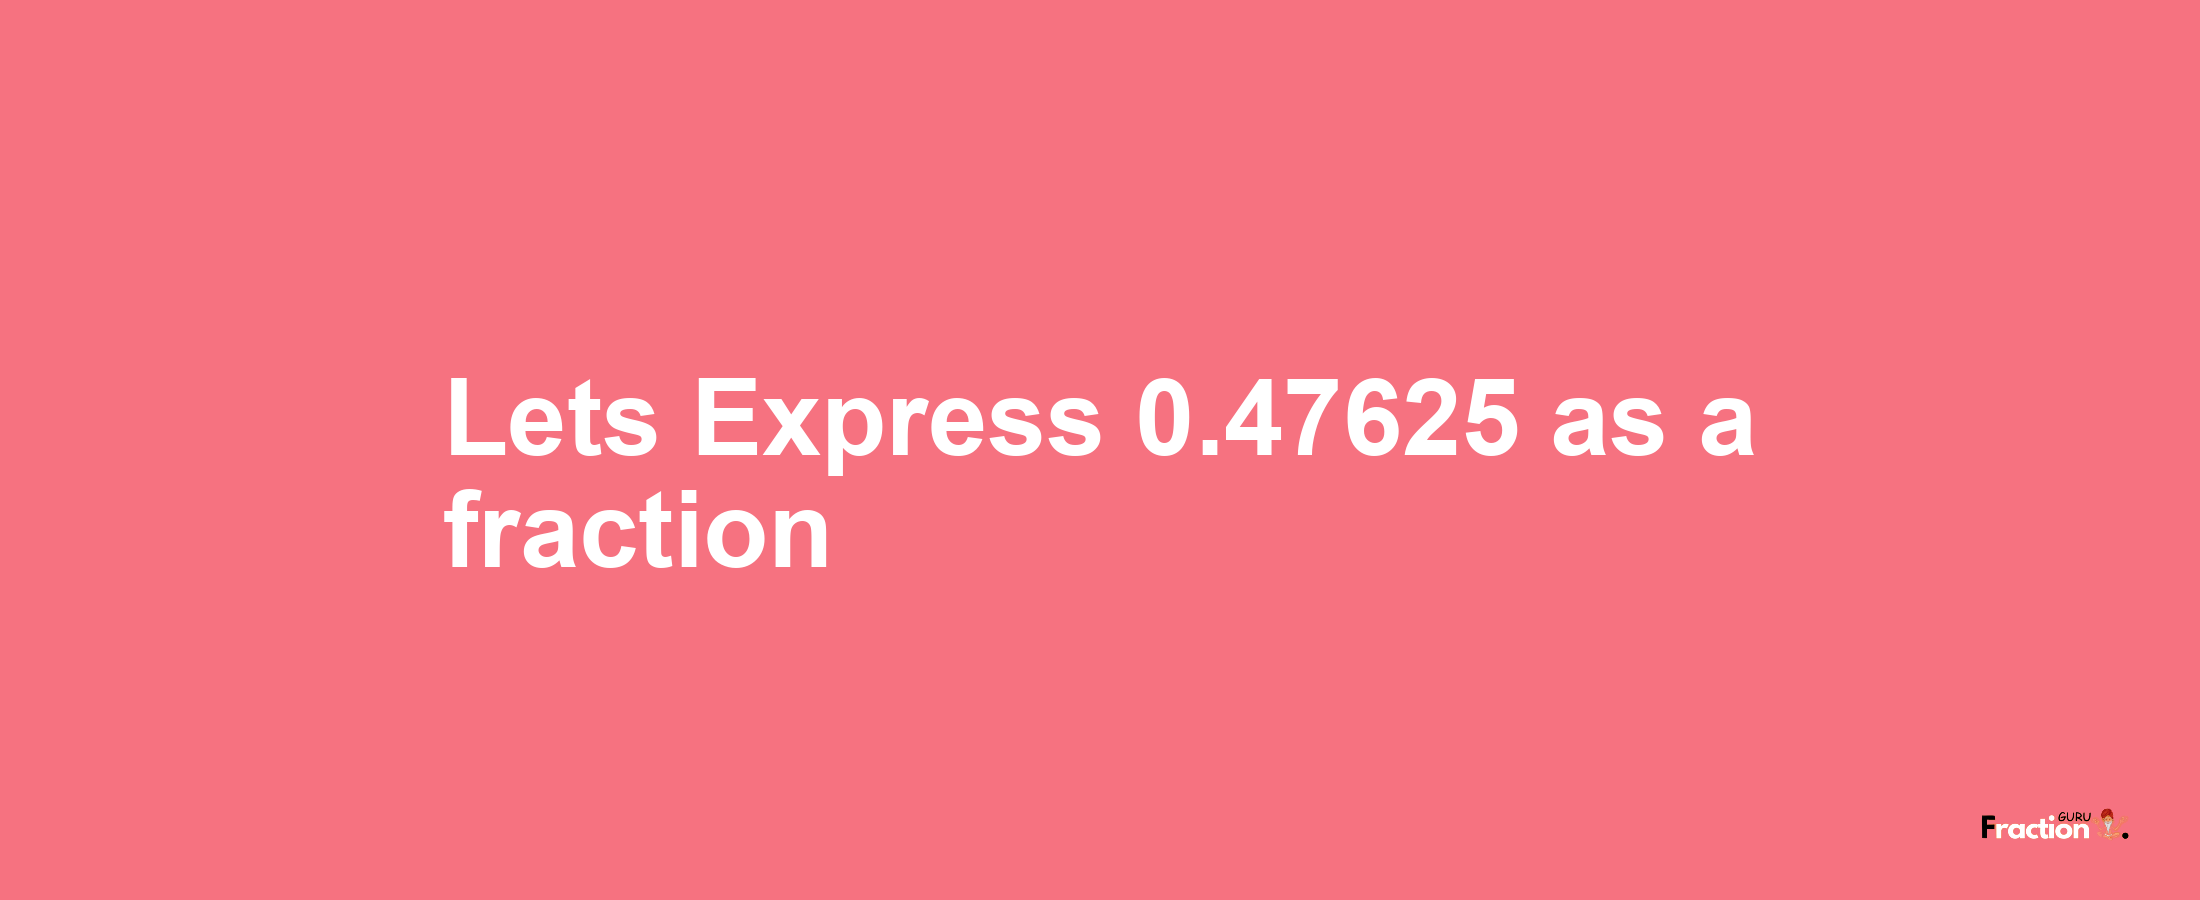 Lets Express 0.47625 as afraction